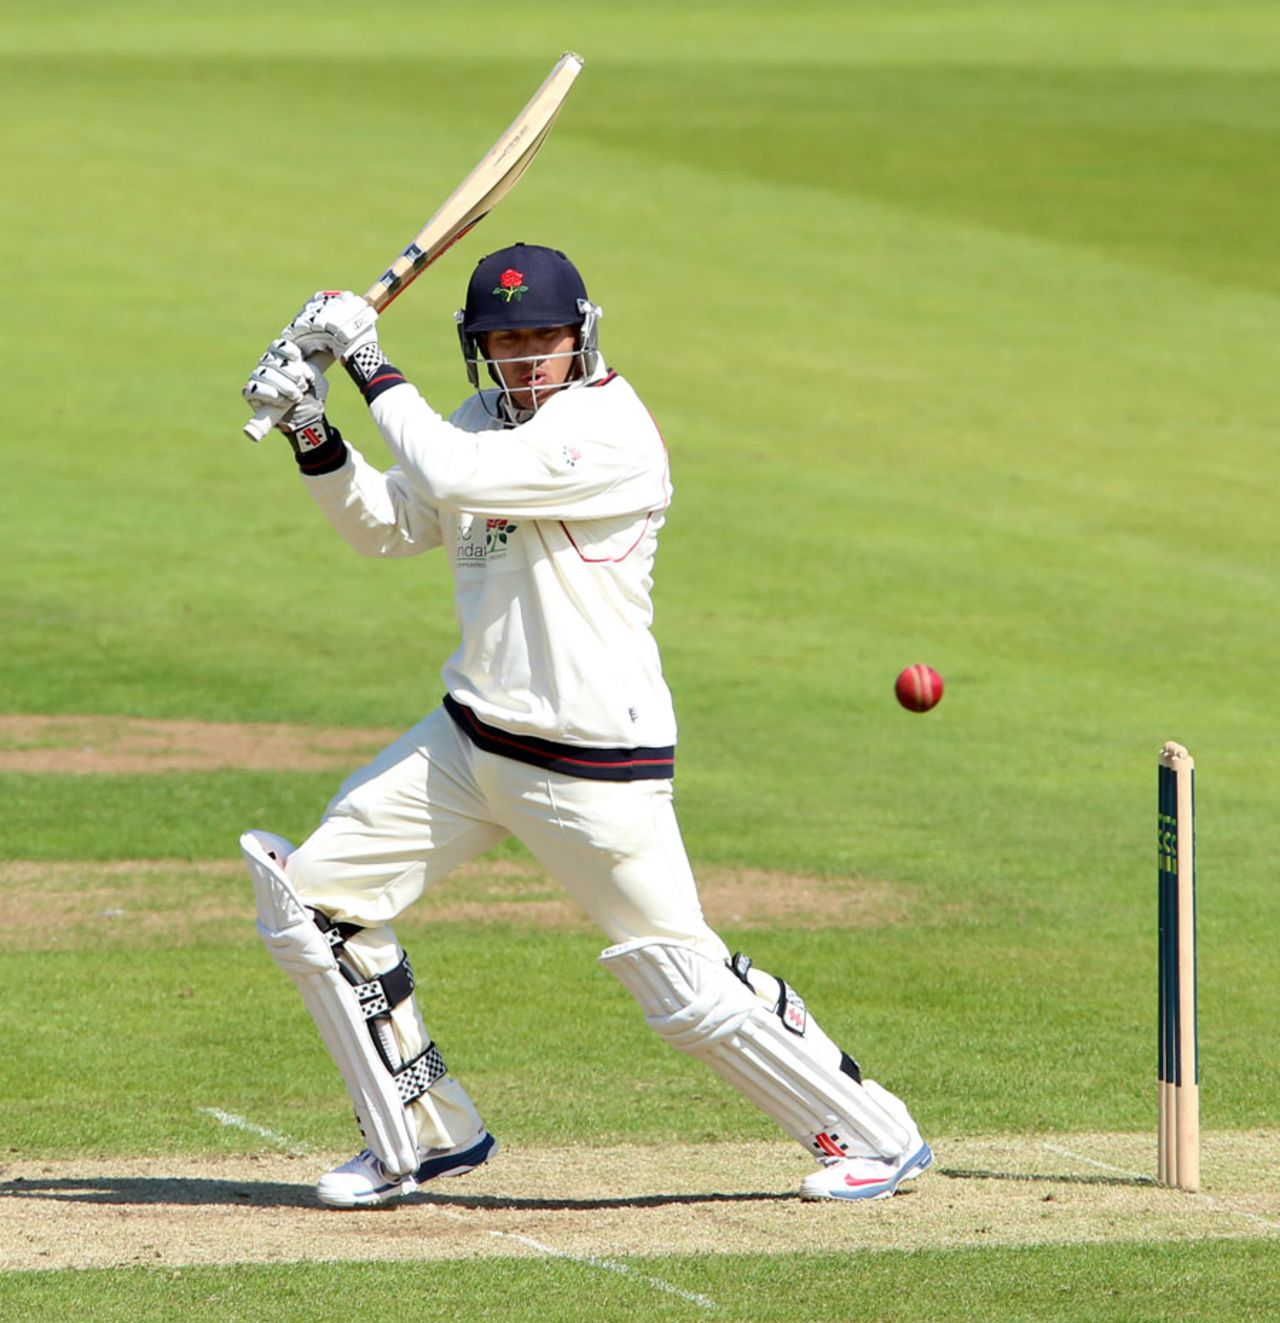 Usman Khawaja played nicely for 86, County Championship, Division One, 2nd day, Chester-le-Street, June 16, 2014